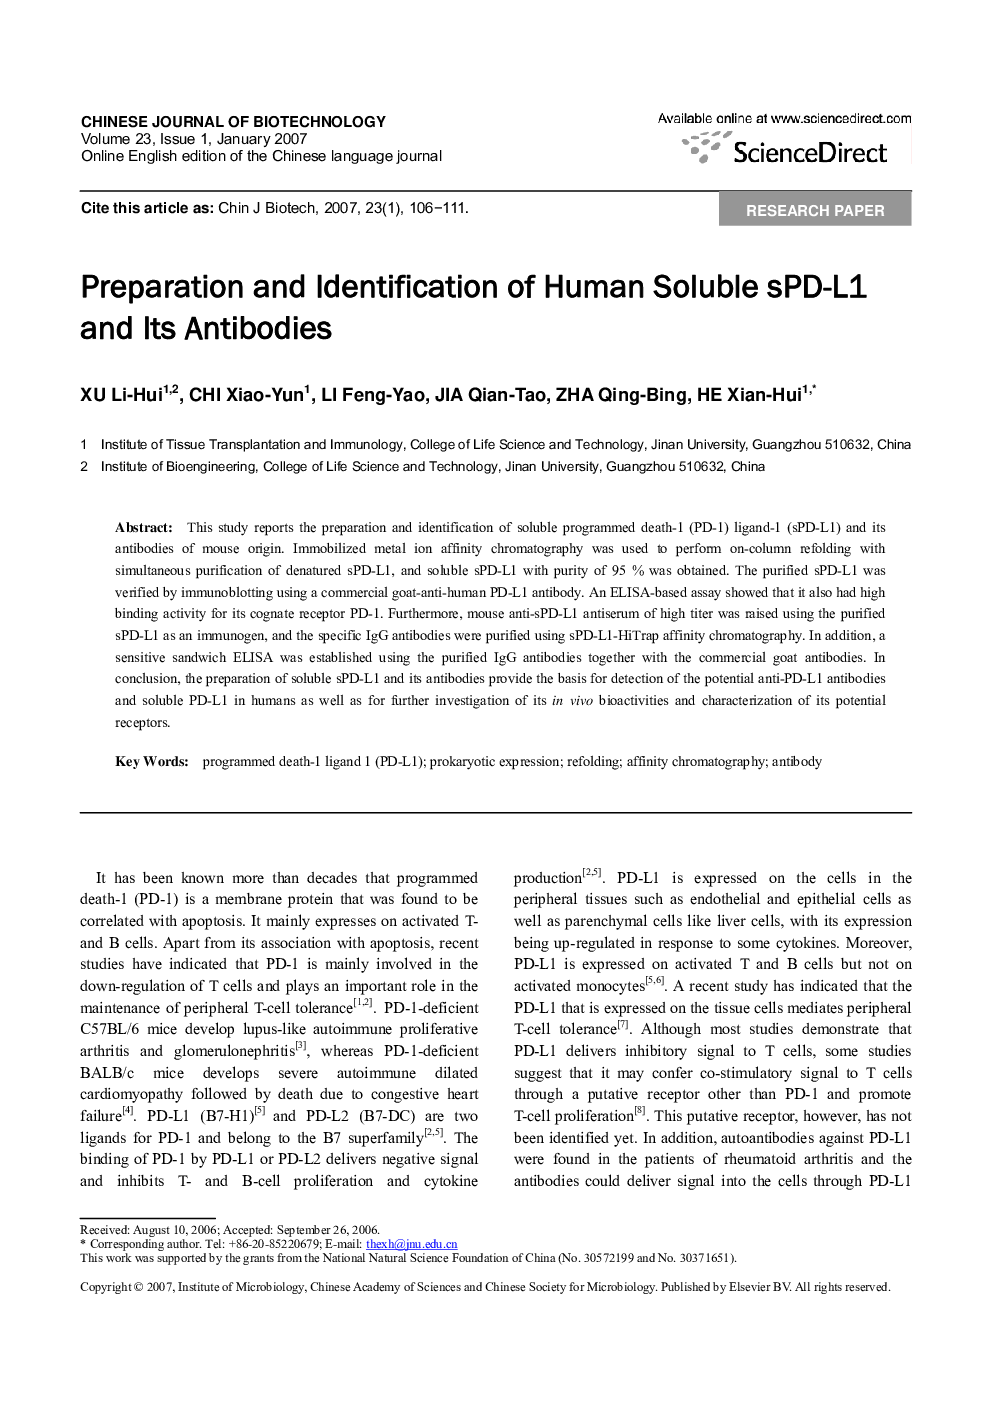 Preparation and Identification of Human Soluble sPD-L1 and Its Antibodies